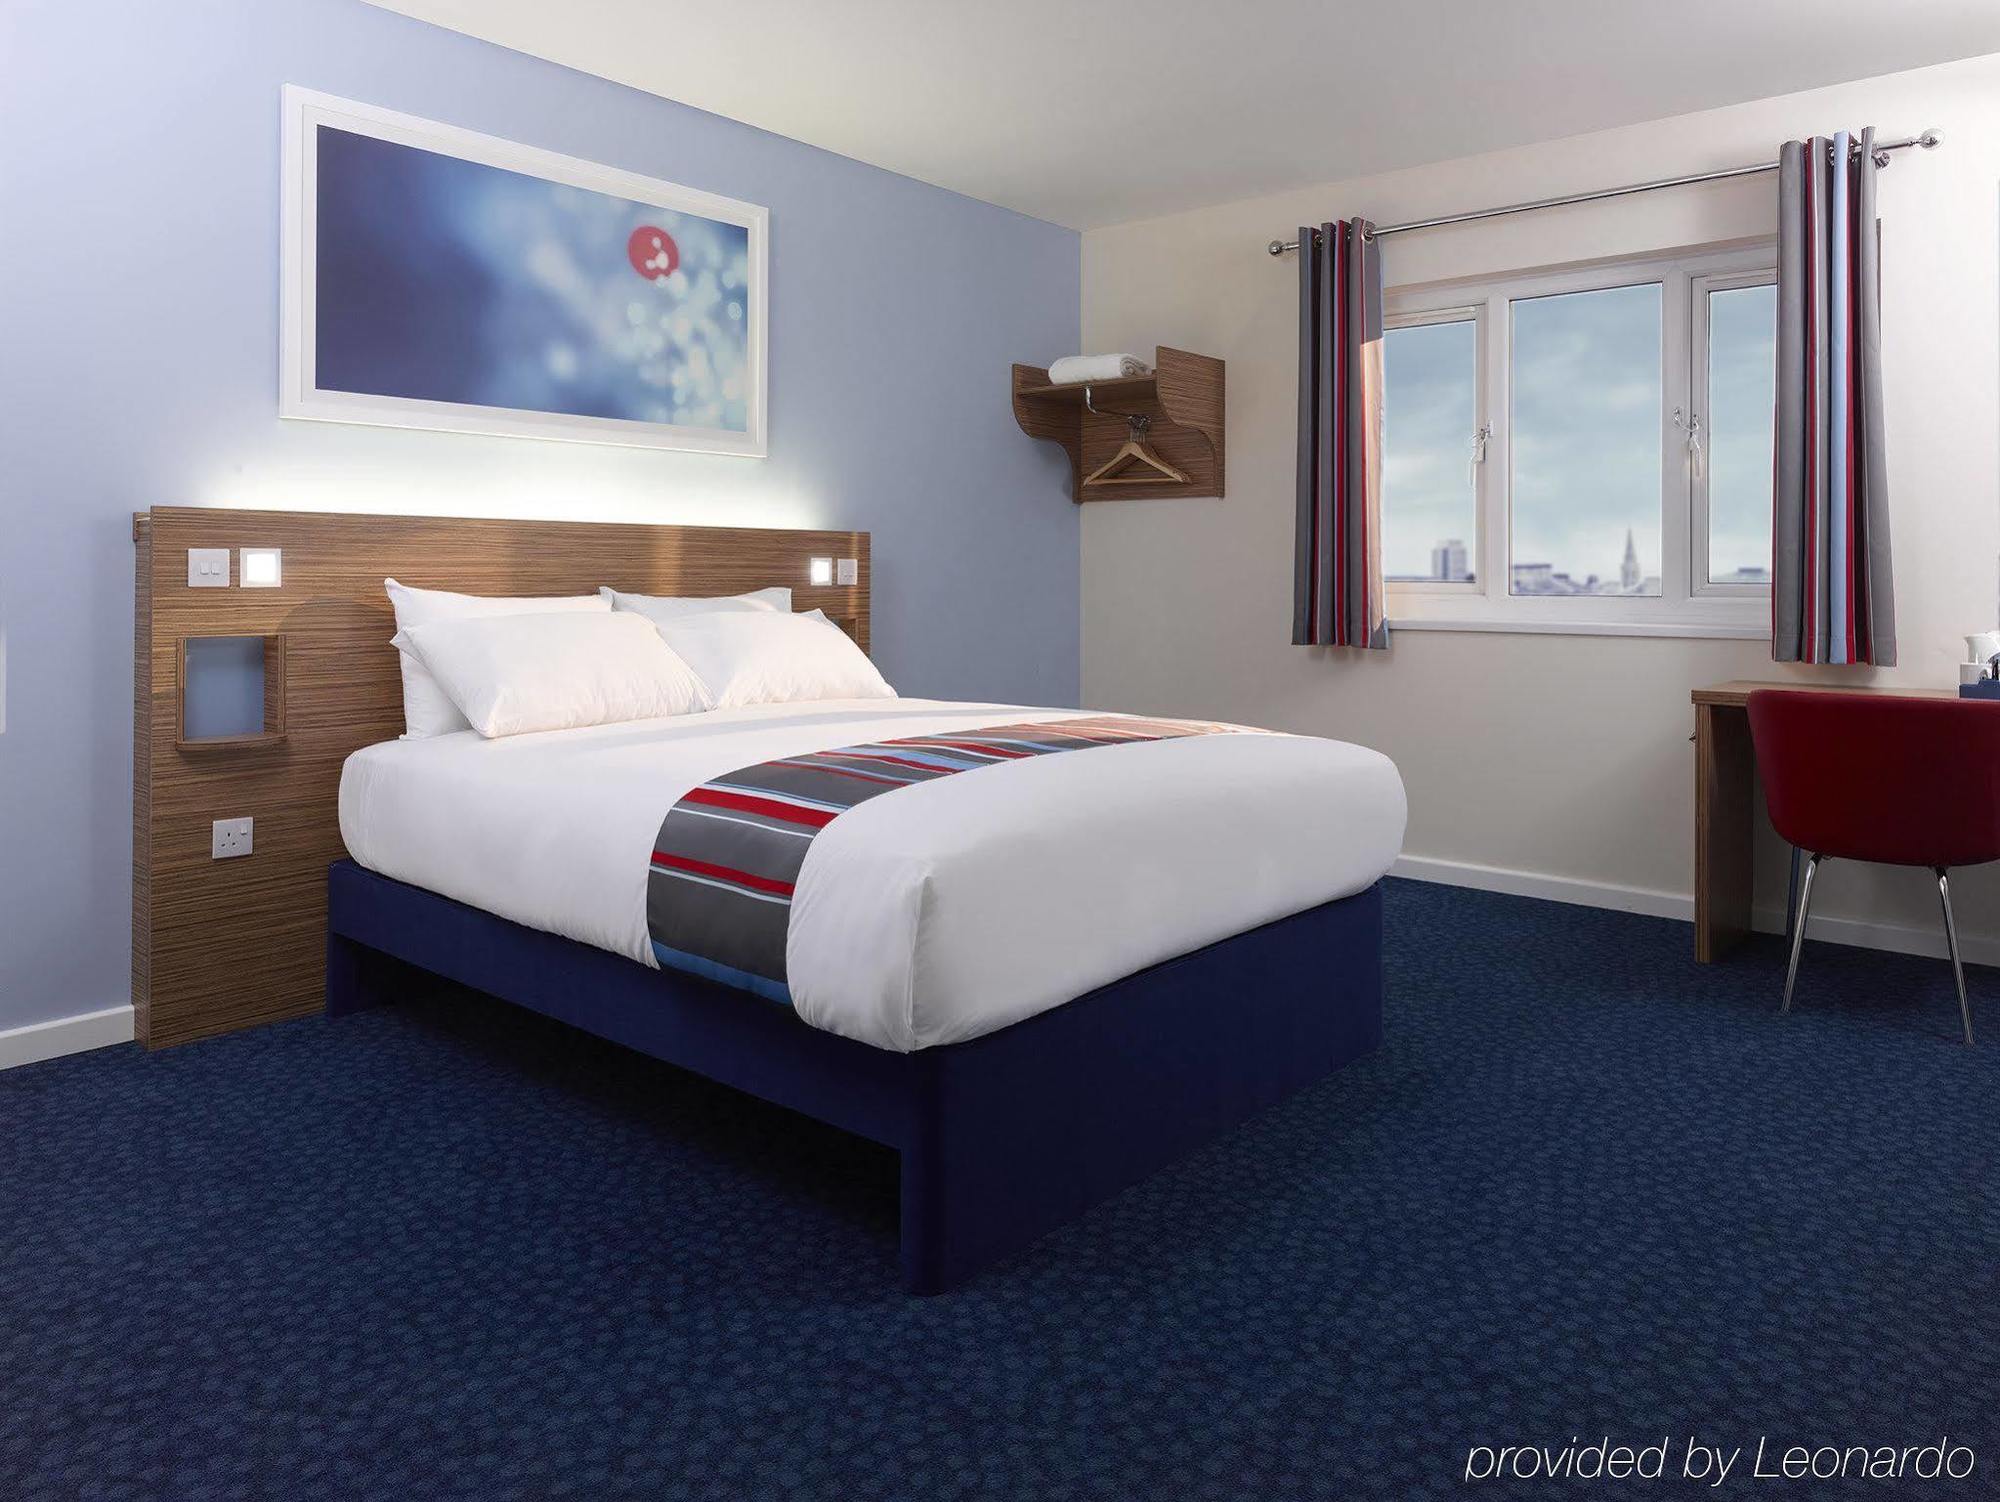 Travelodge Aberdeen Central Justice Mill Экстерьер фото